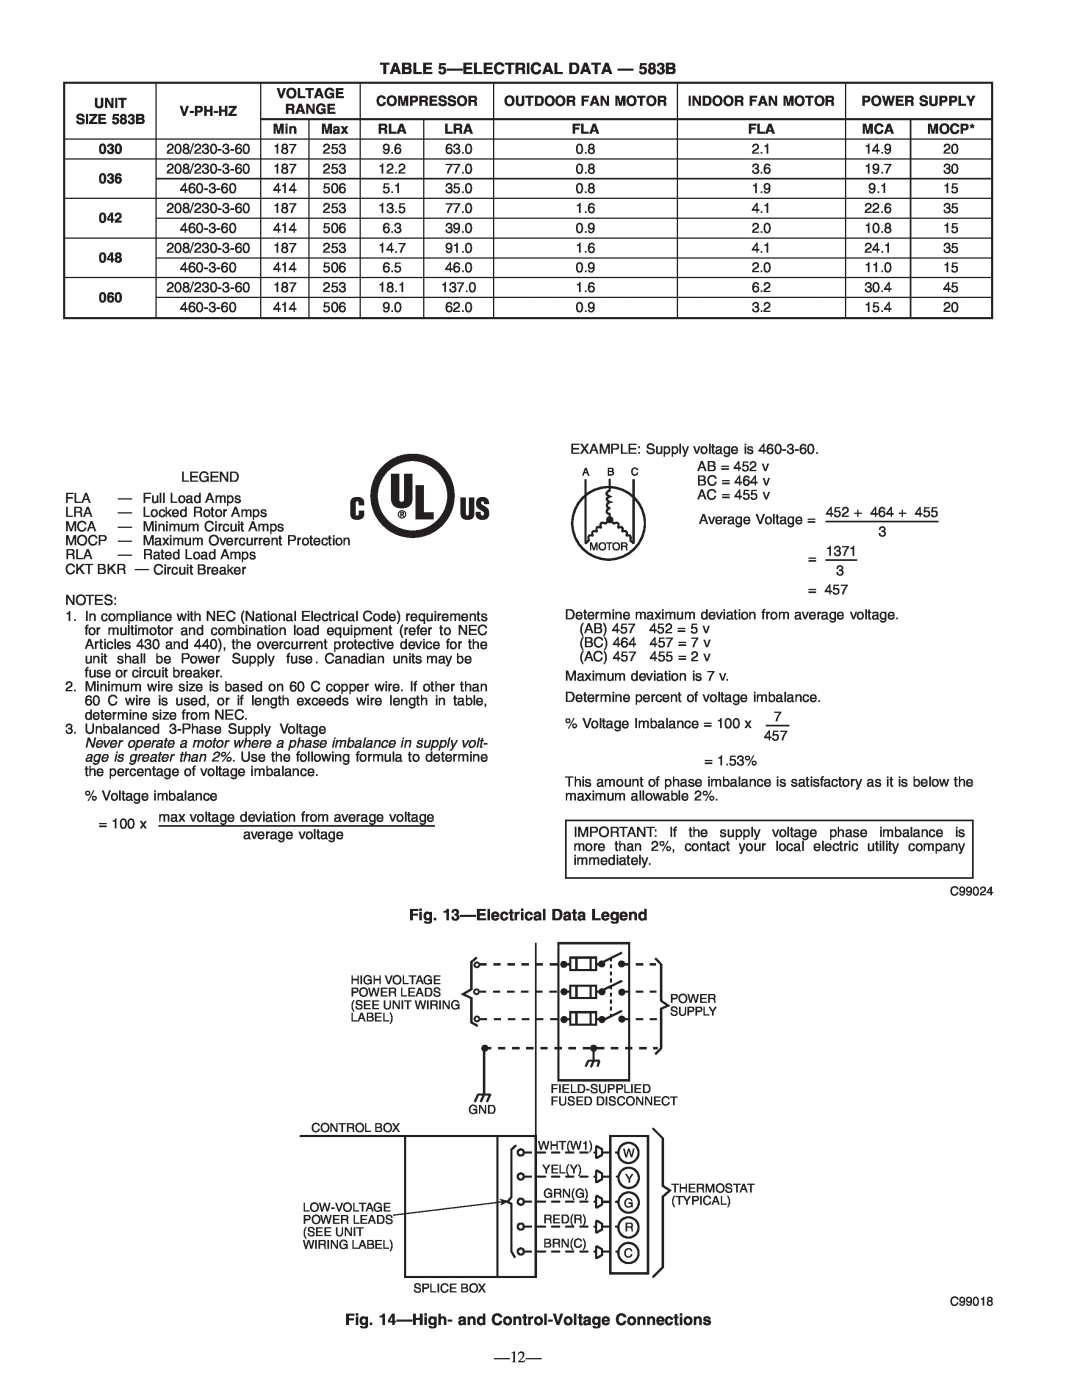 Bryant instruction manual ELECTRICALDATA - 583B, ElectricalData Legend, High-and Control-VoltageConnections 